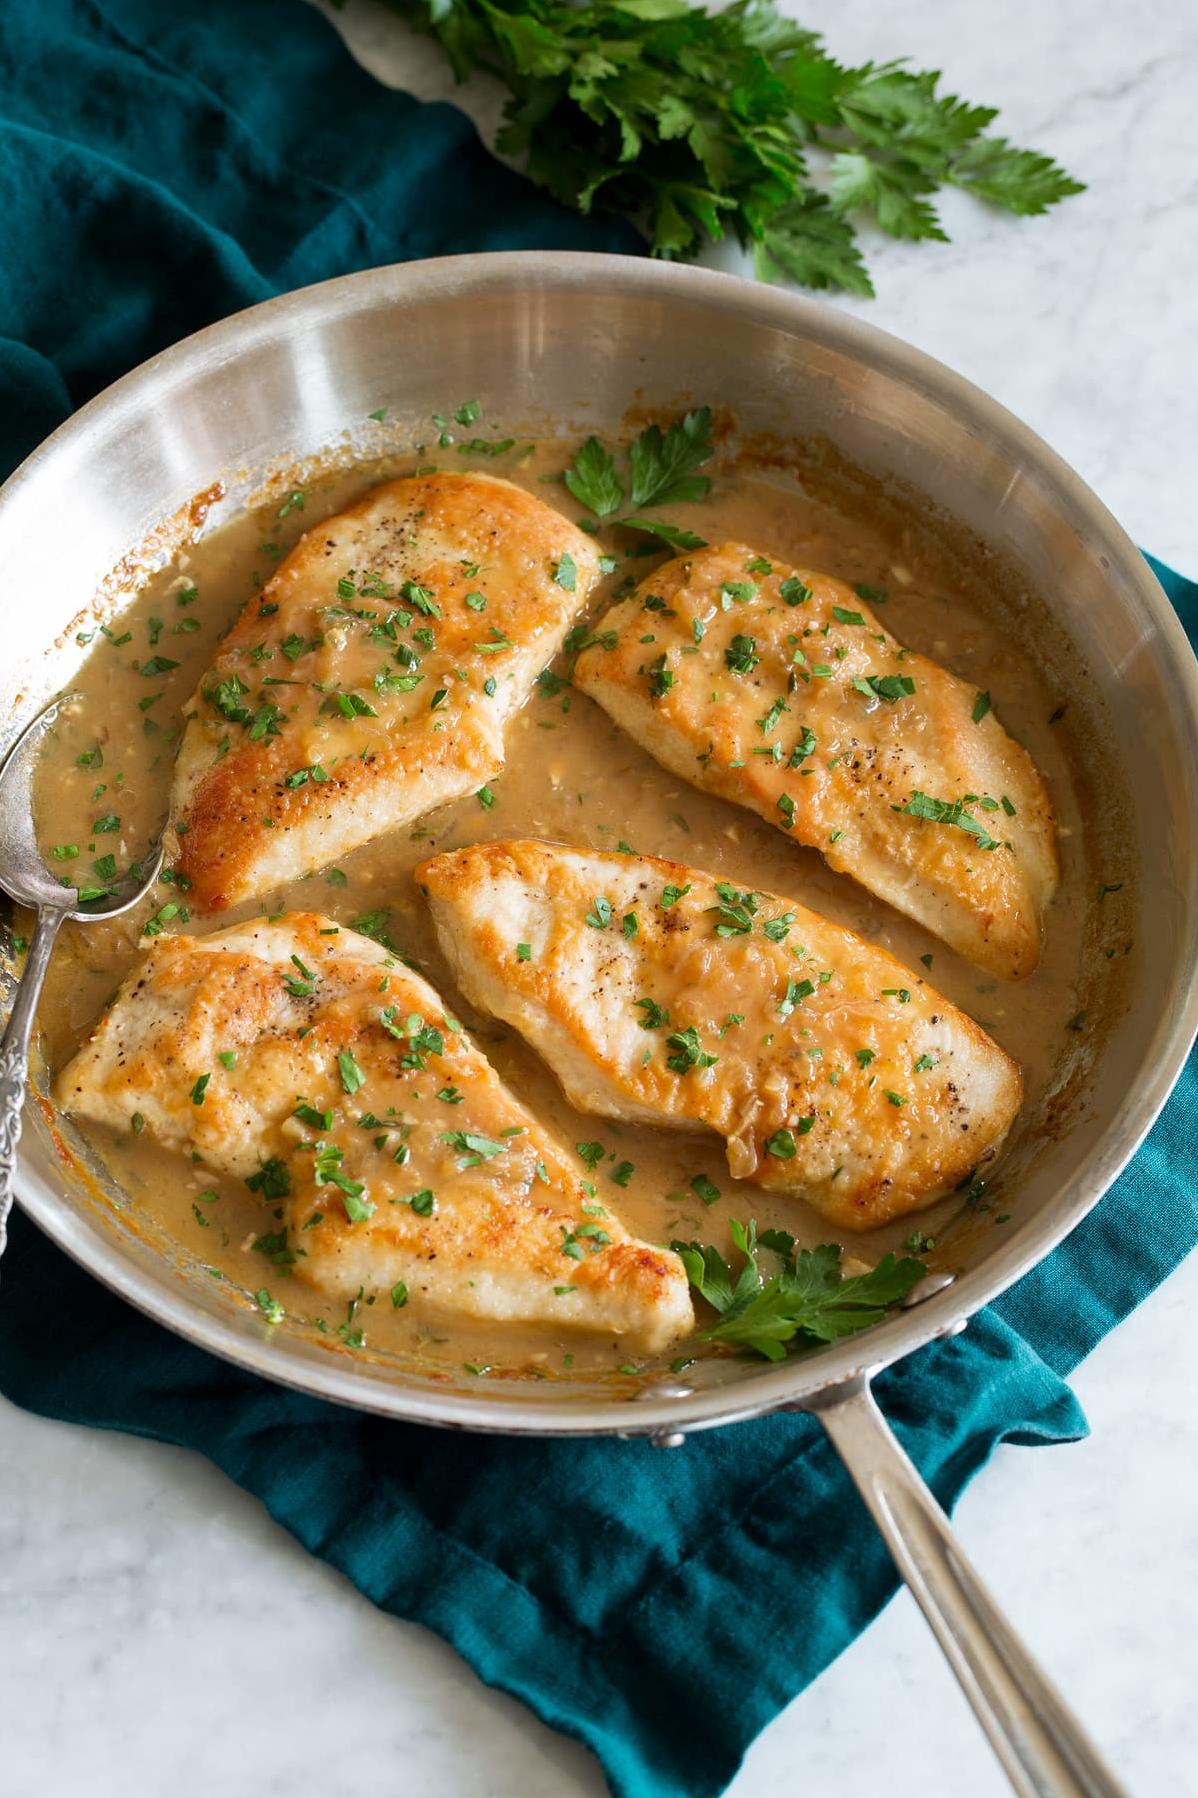  Taste the elegance of homemade white wine sauce paired with tender chicken breast.